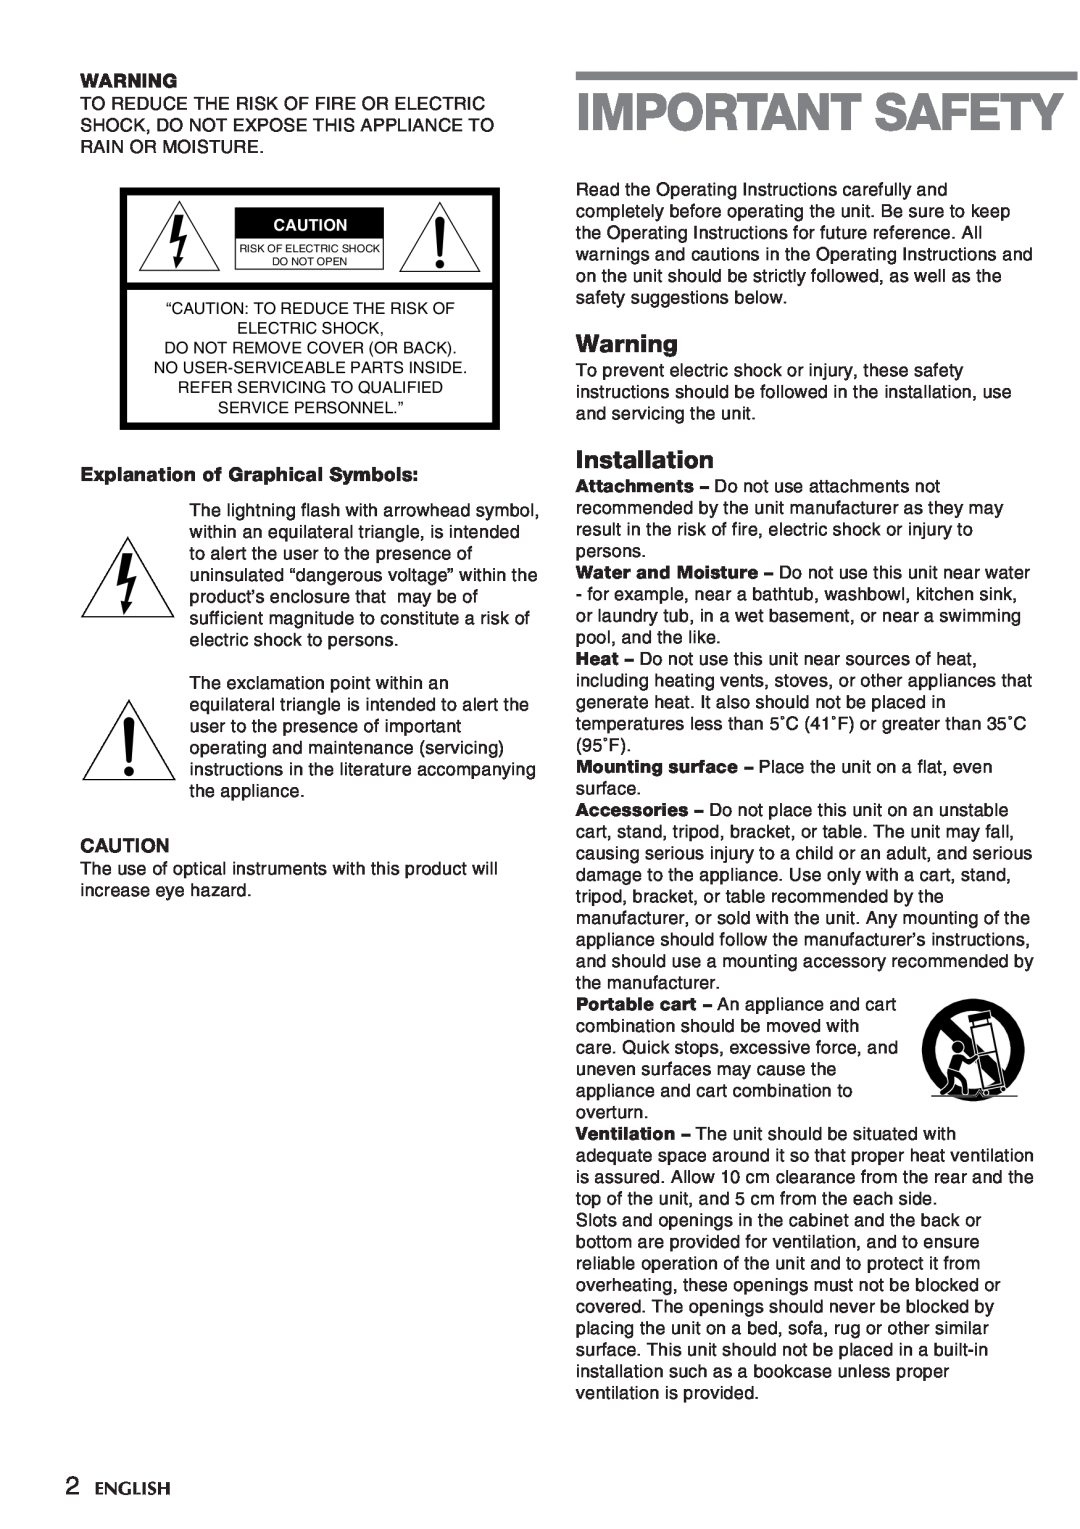 Sony CSD-TD30, CSD-TD10 manual Installation, Explanation of Graphical Symbols, English, Important Safety 